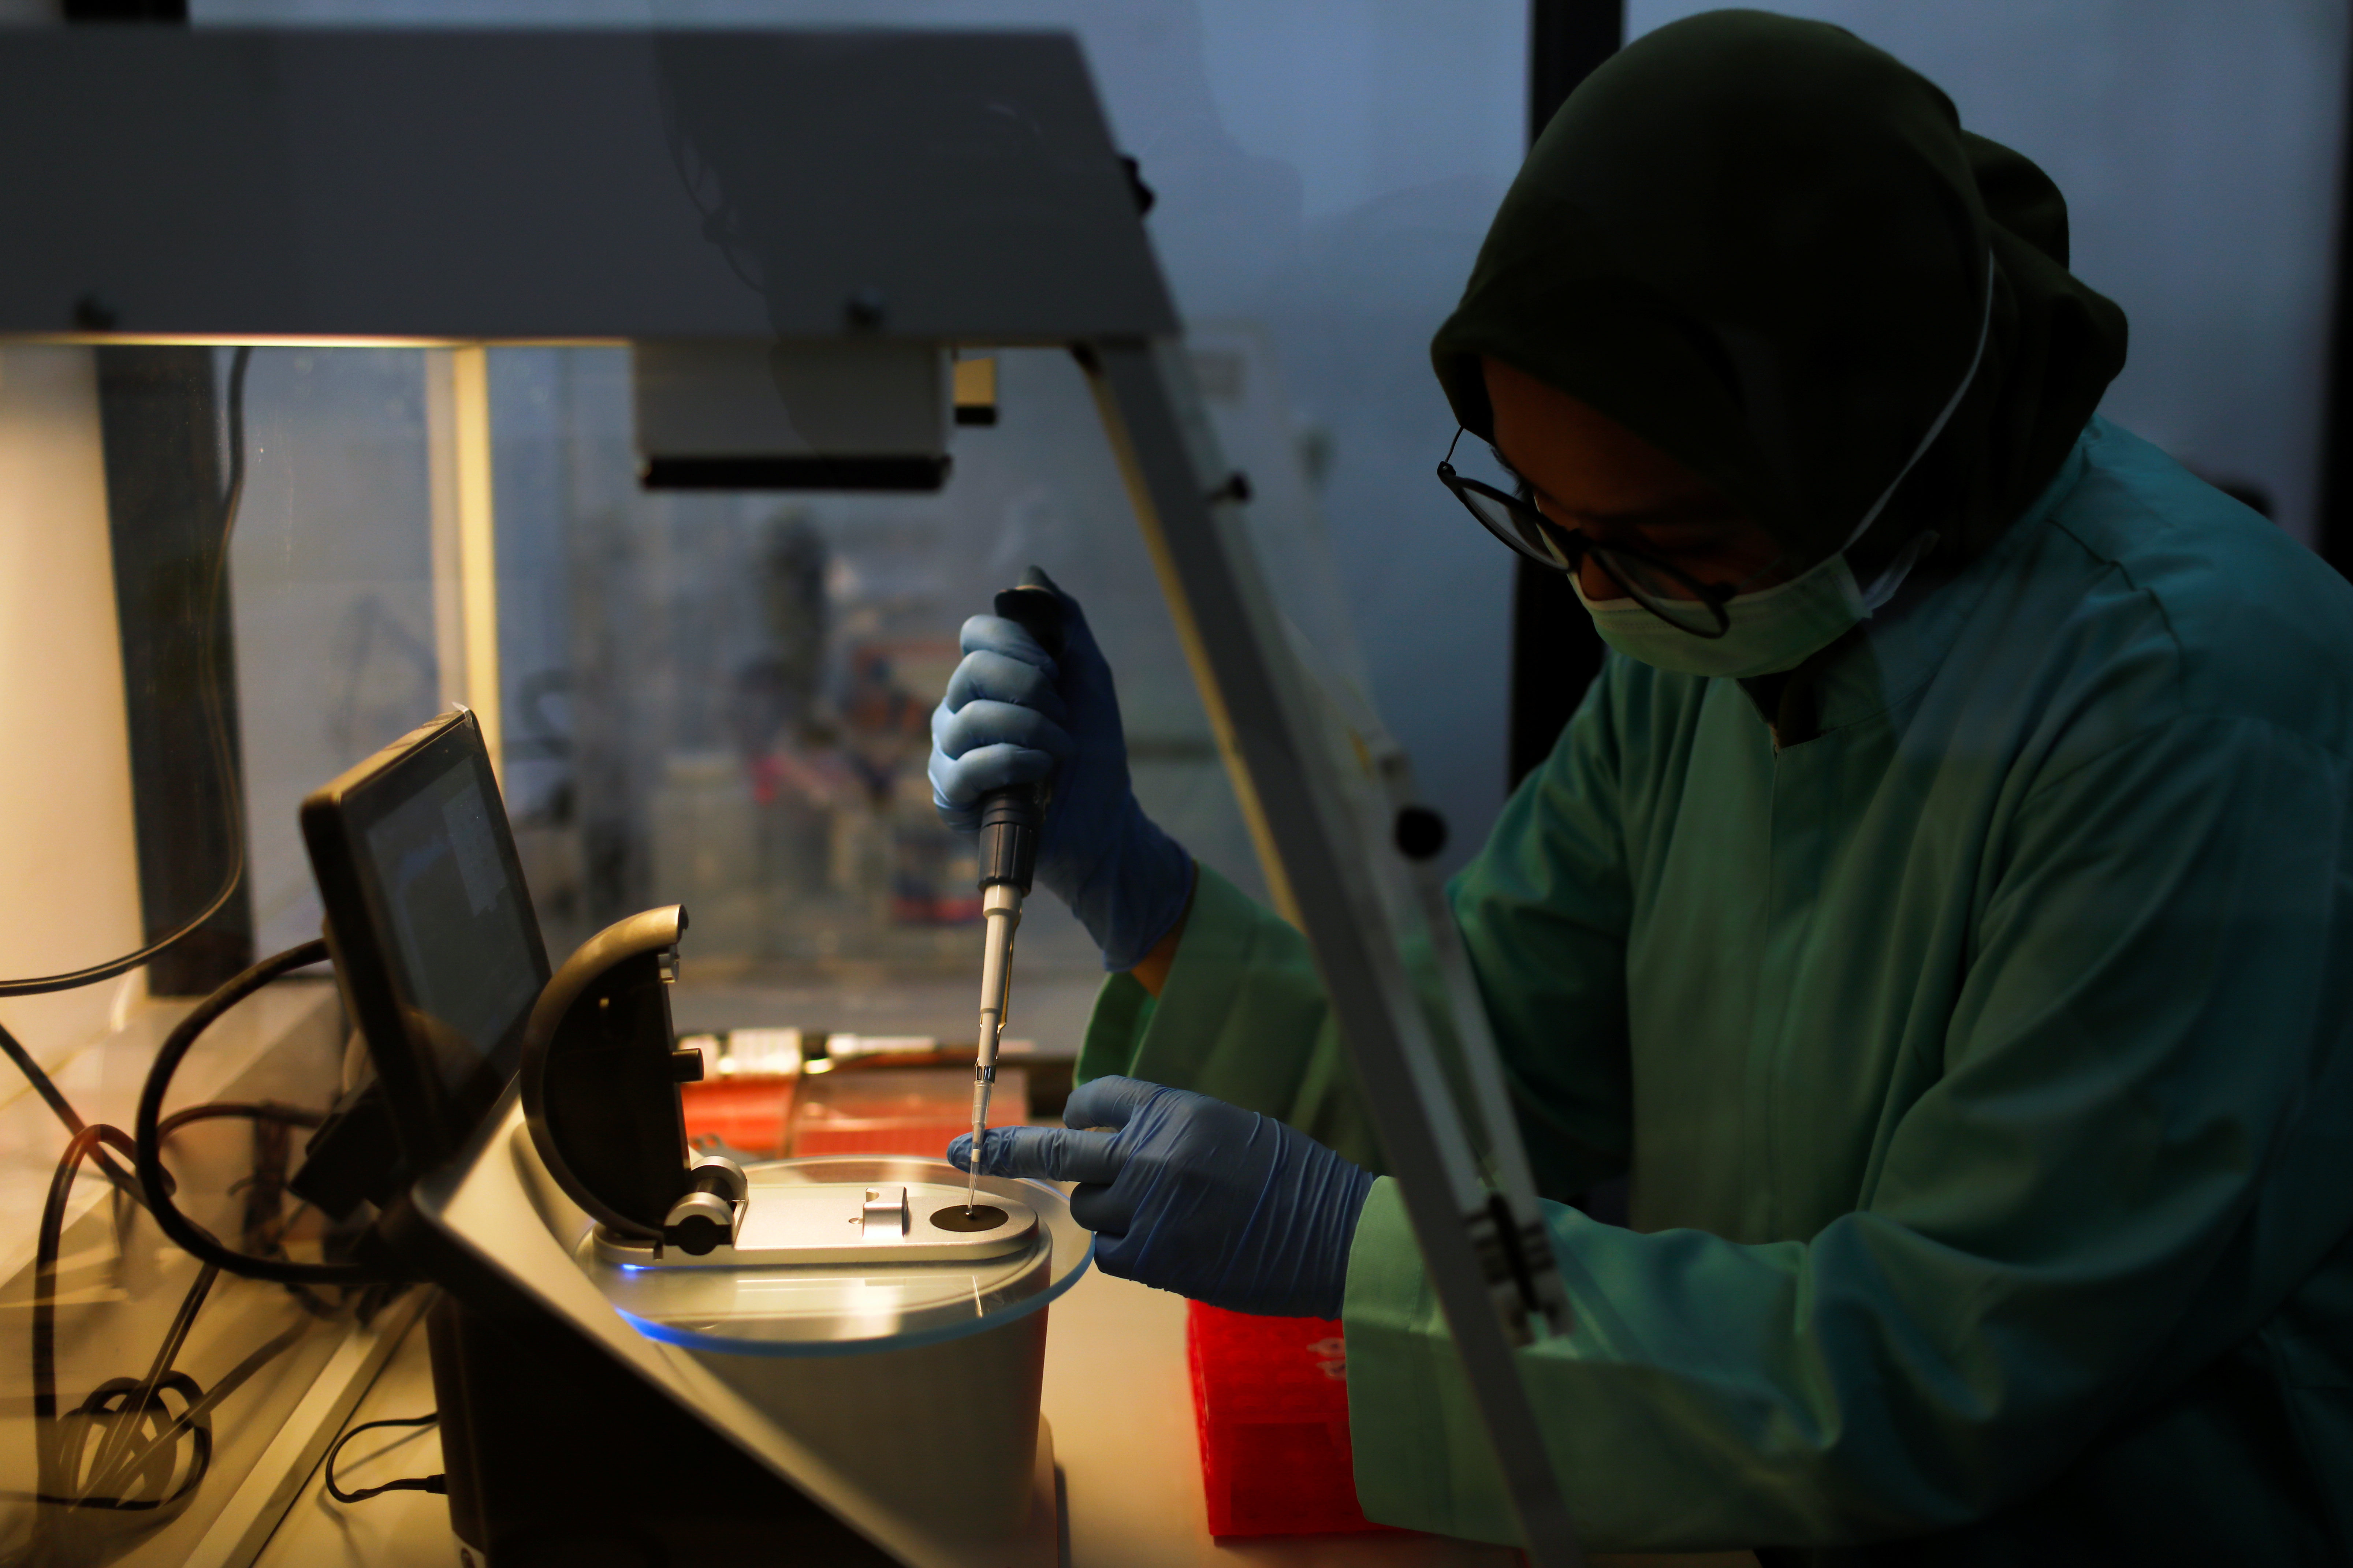 An analyst of Global Halal Centre works inside a Spectro room at a laboratorium, in Bogor